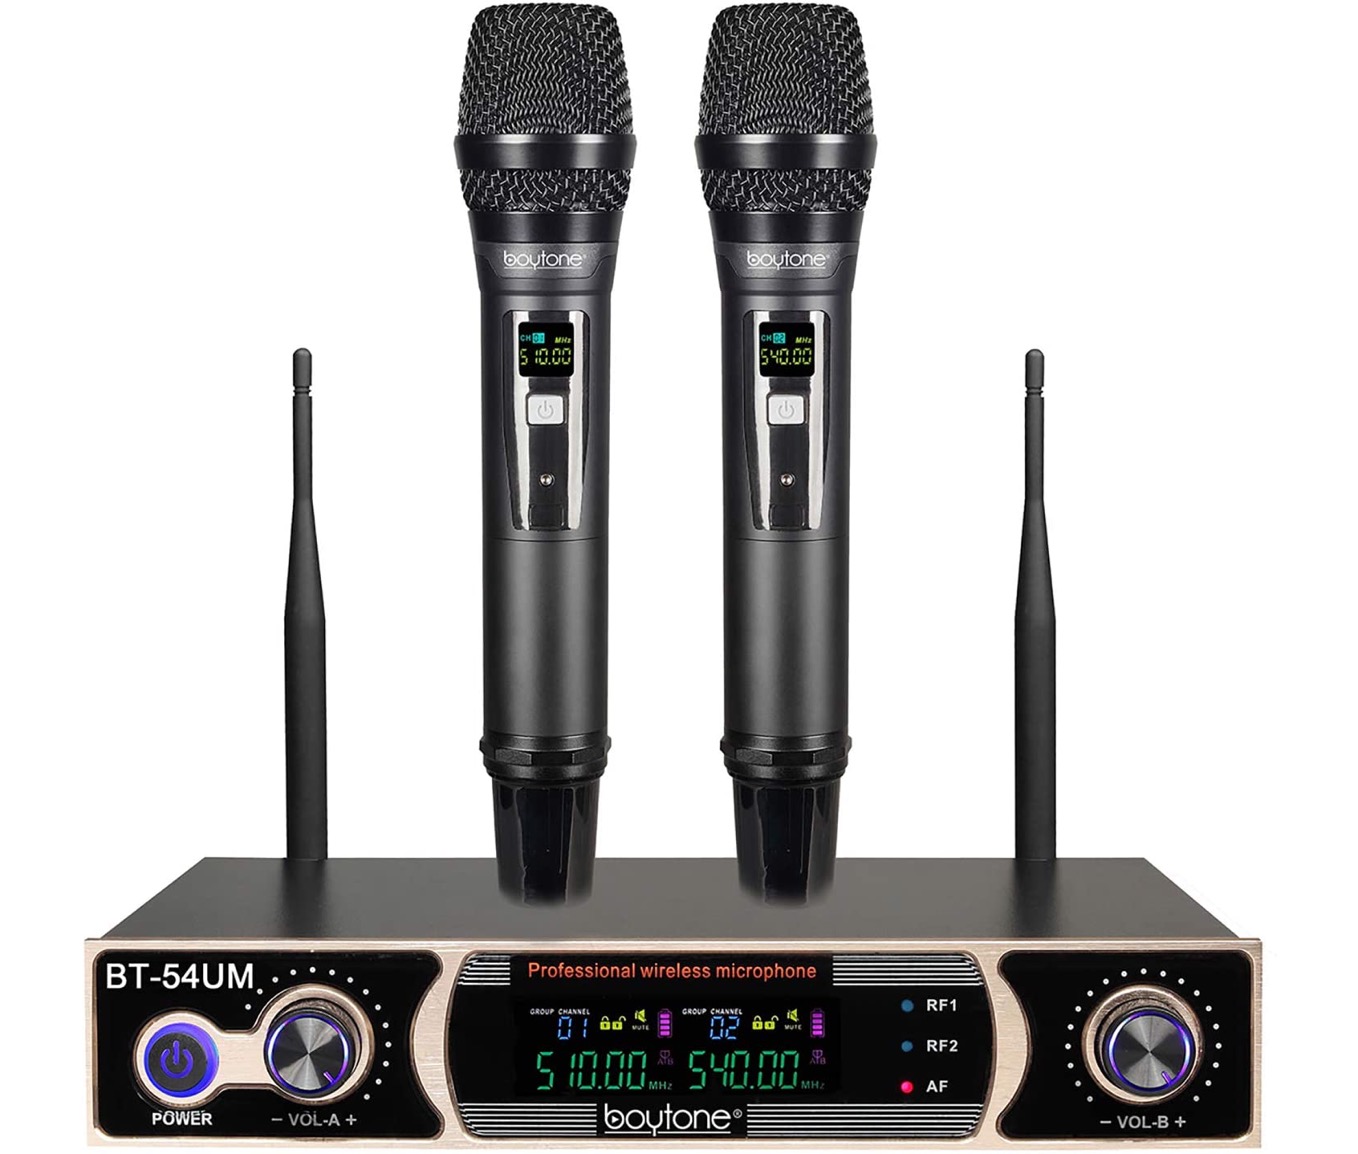 Wireless microphone system Electronics at